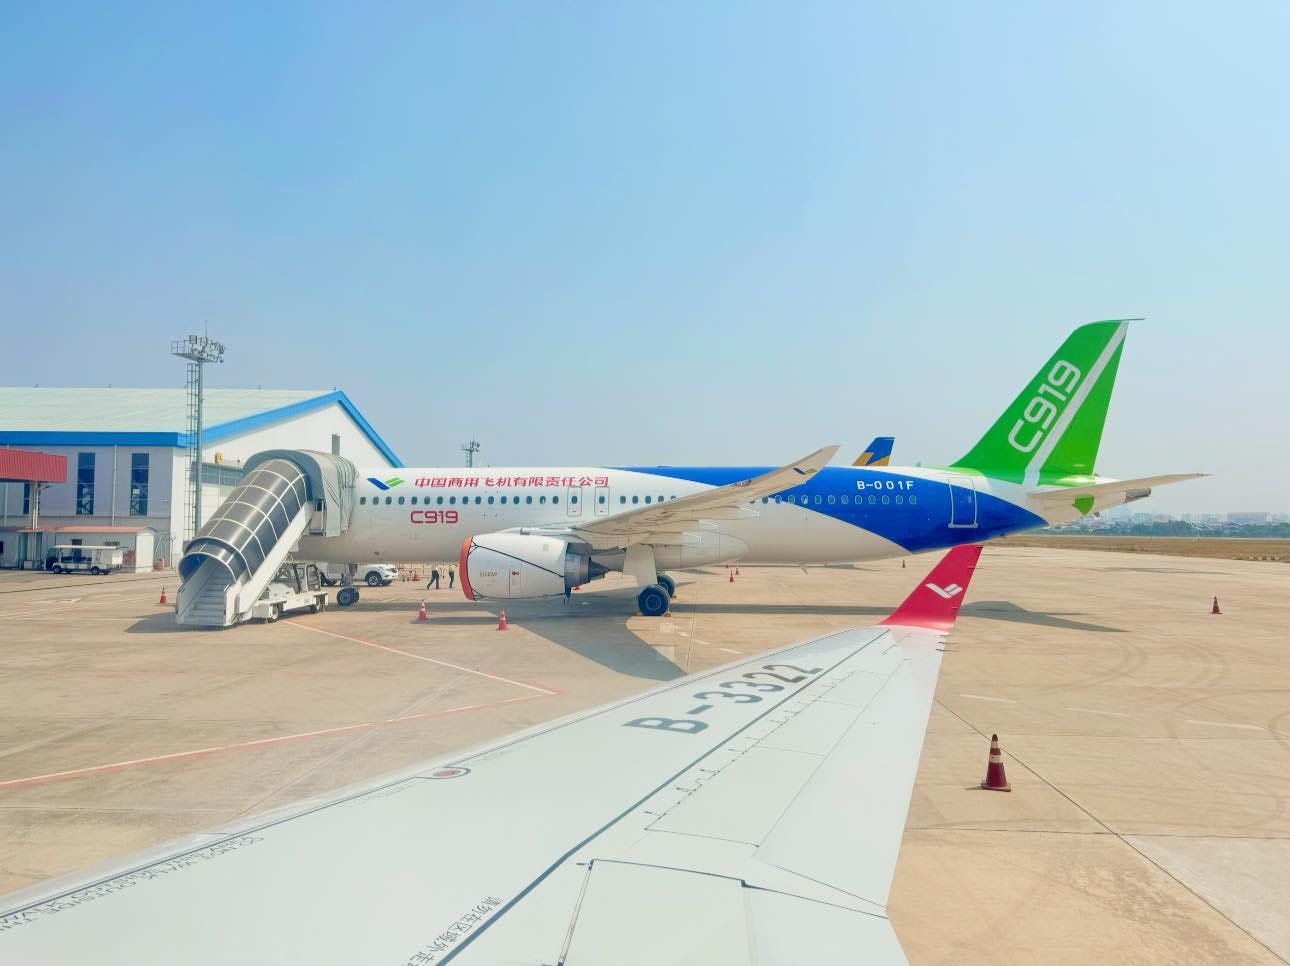 Comac’s C919 could find a launch customer in Southeast Asia